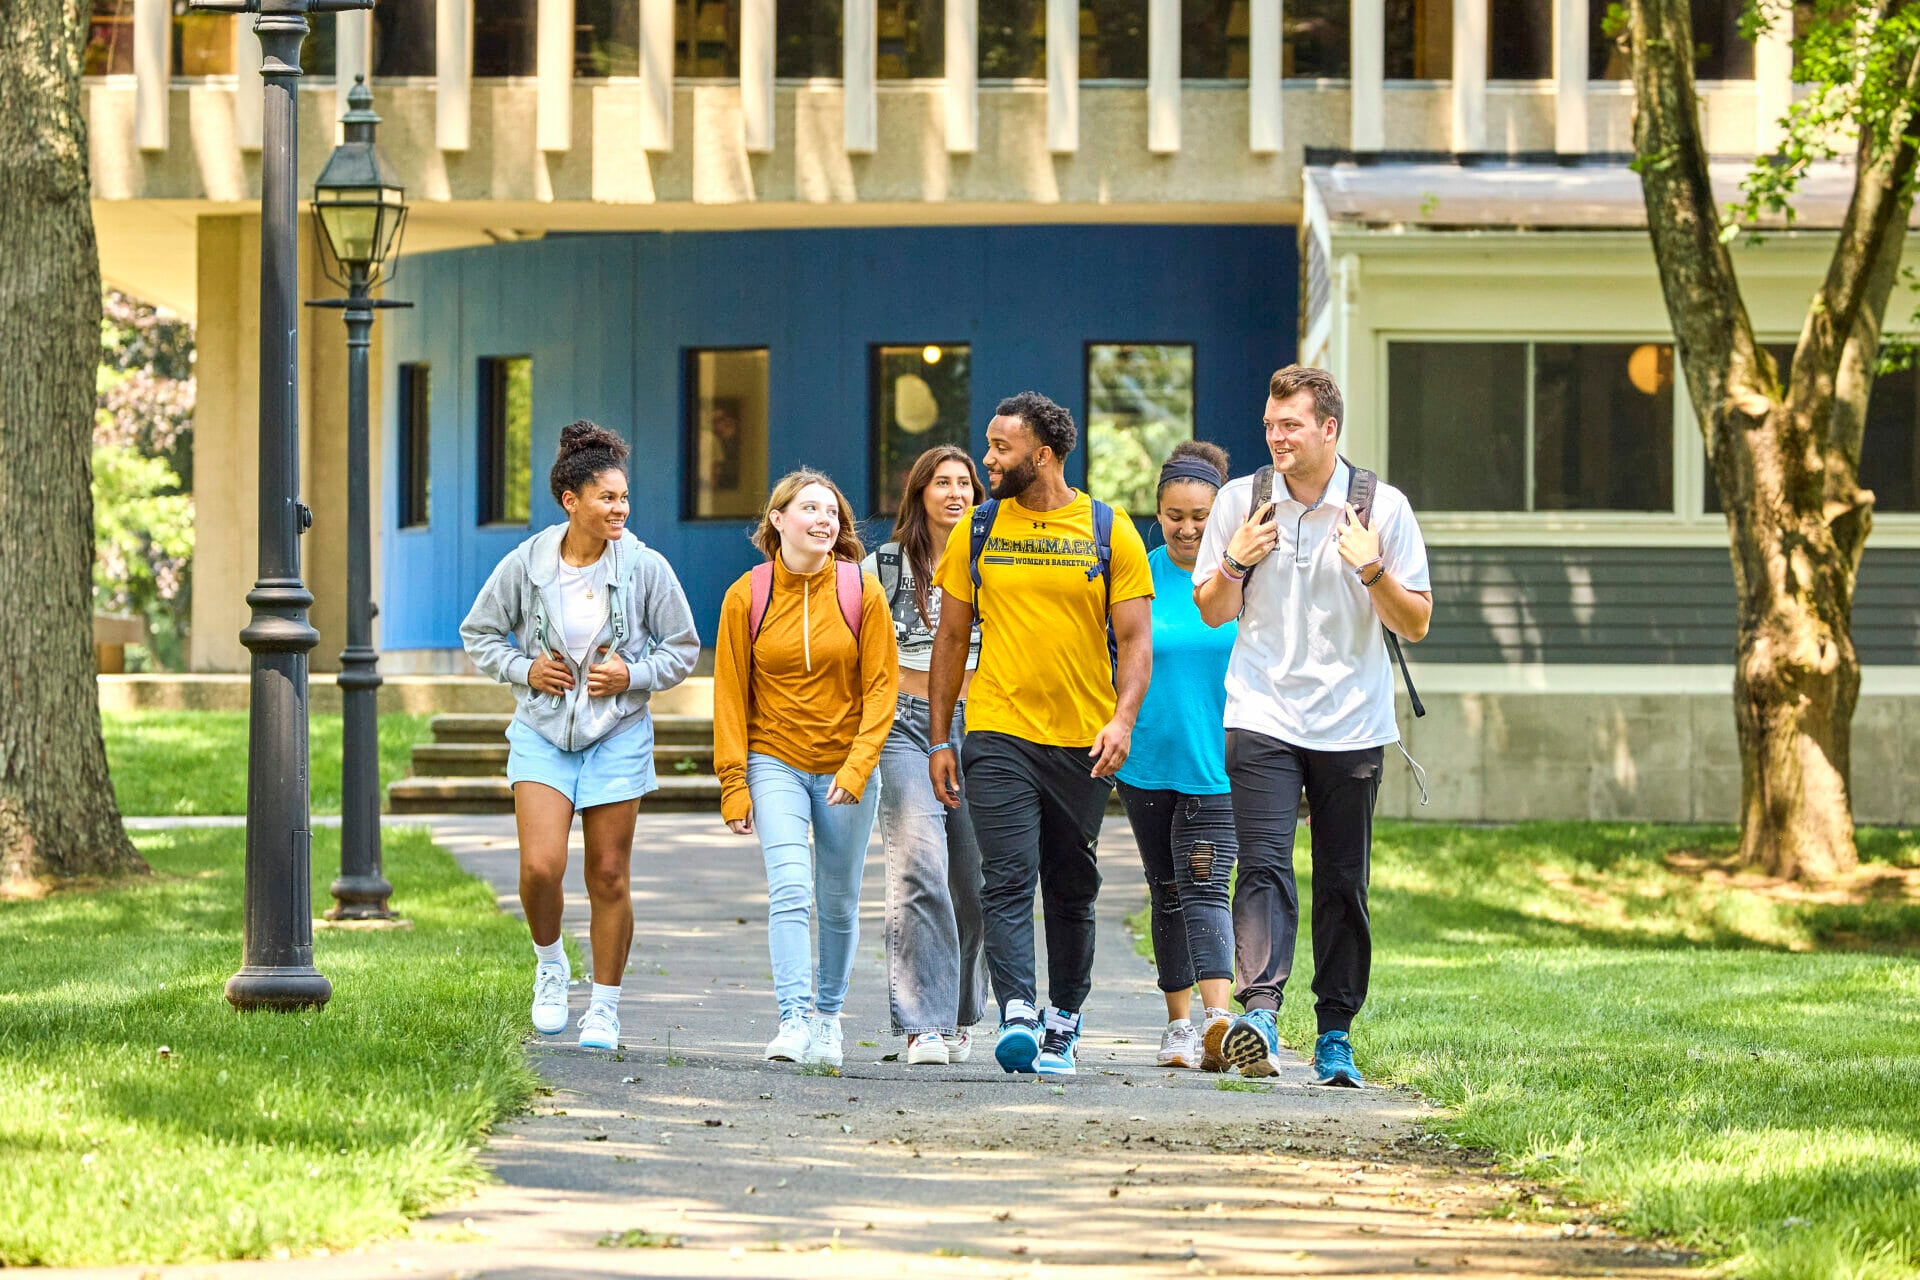 Students walking together across campus